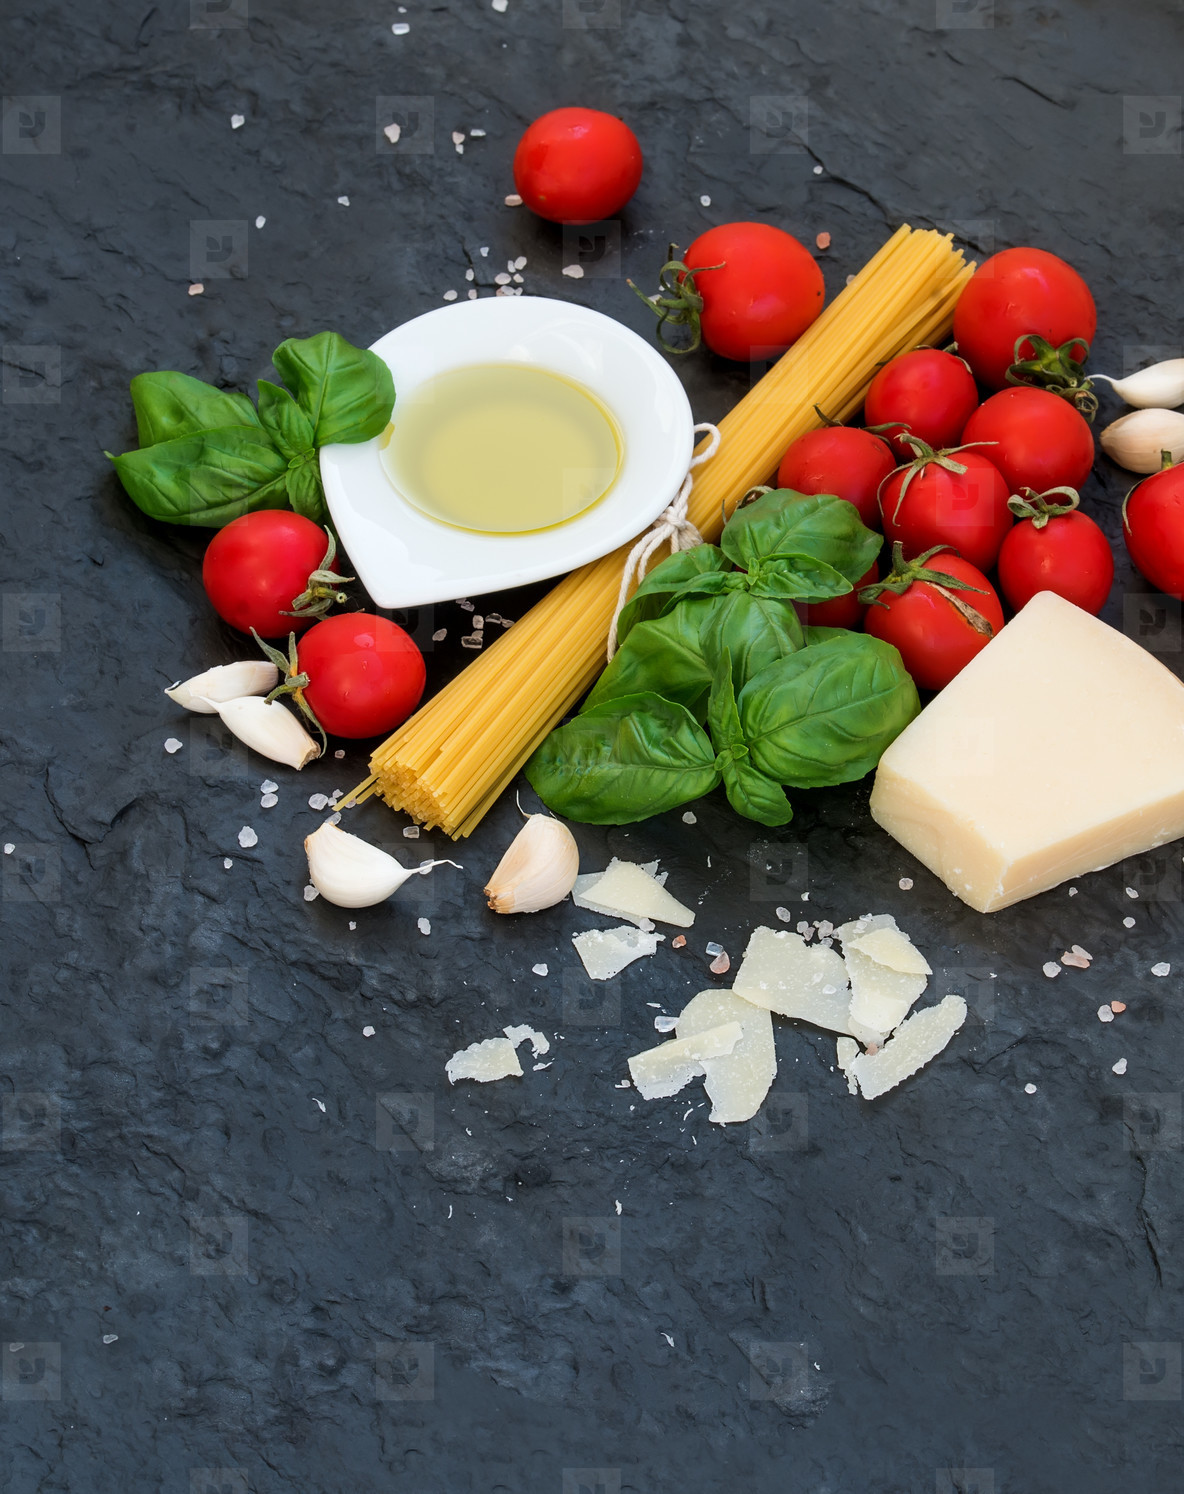 Ingredients for cooking pasta. Spaghetti, olive oil, garlic, Parmesan cheese, tomatoes and fresh basil on black slate background, top view, copy space.